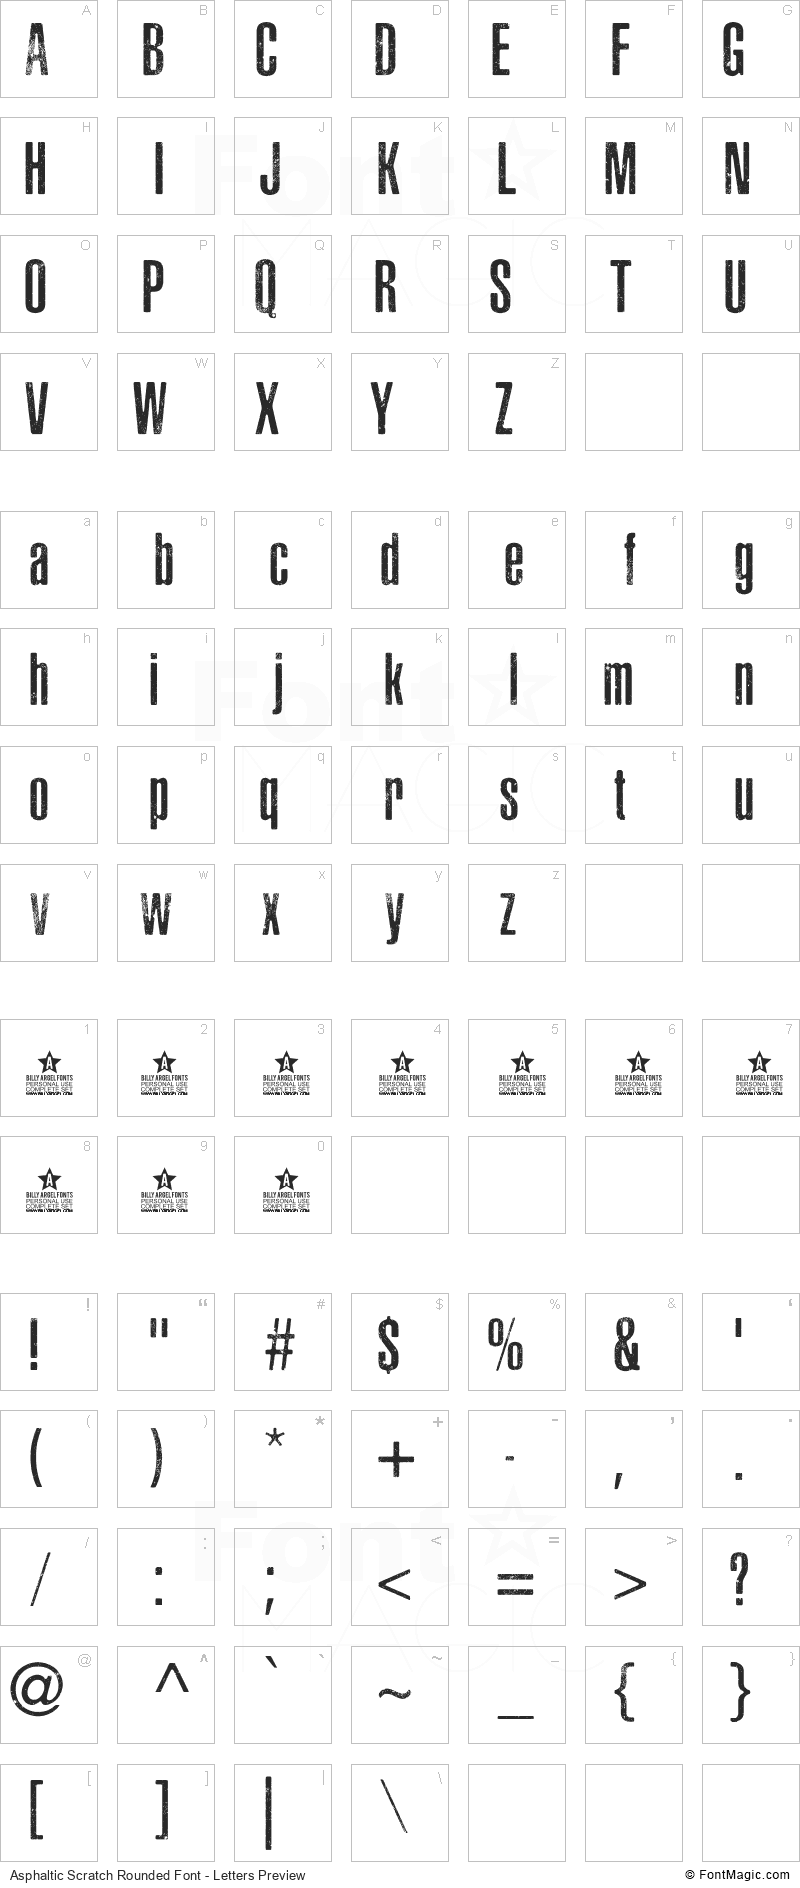 Asphaltic Scratch Rounded Font - All Latters Preview Chart